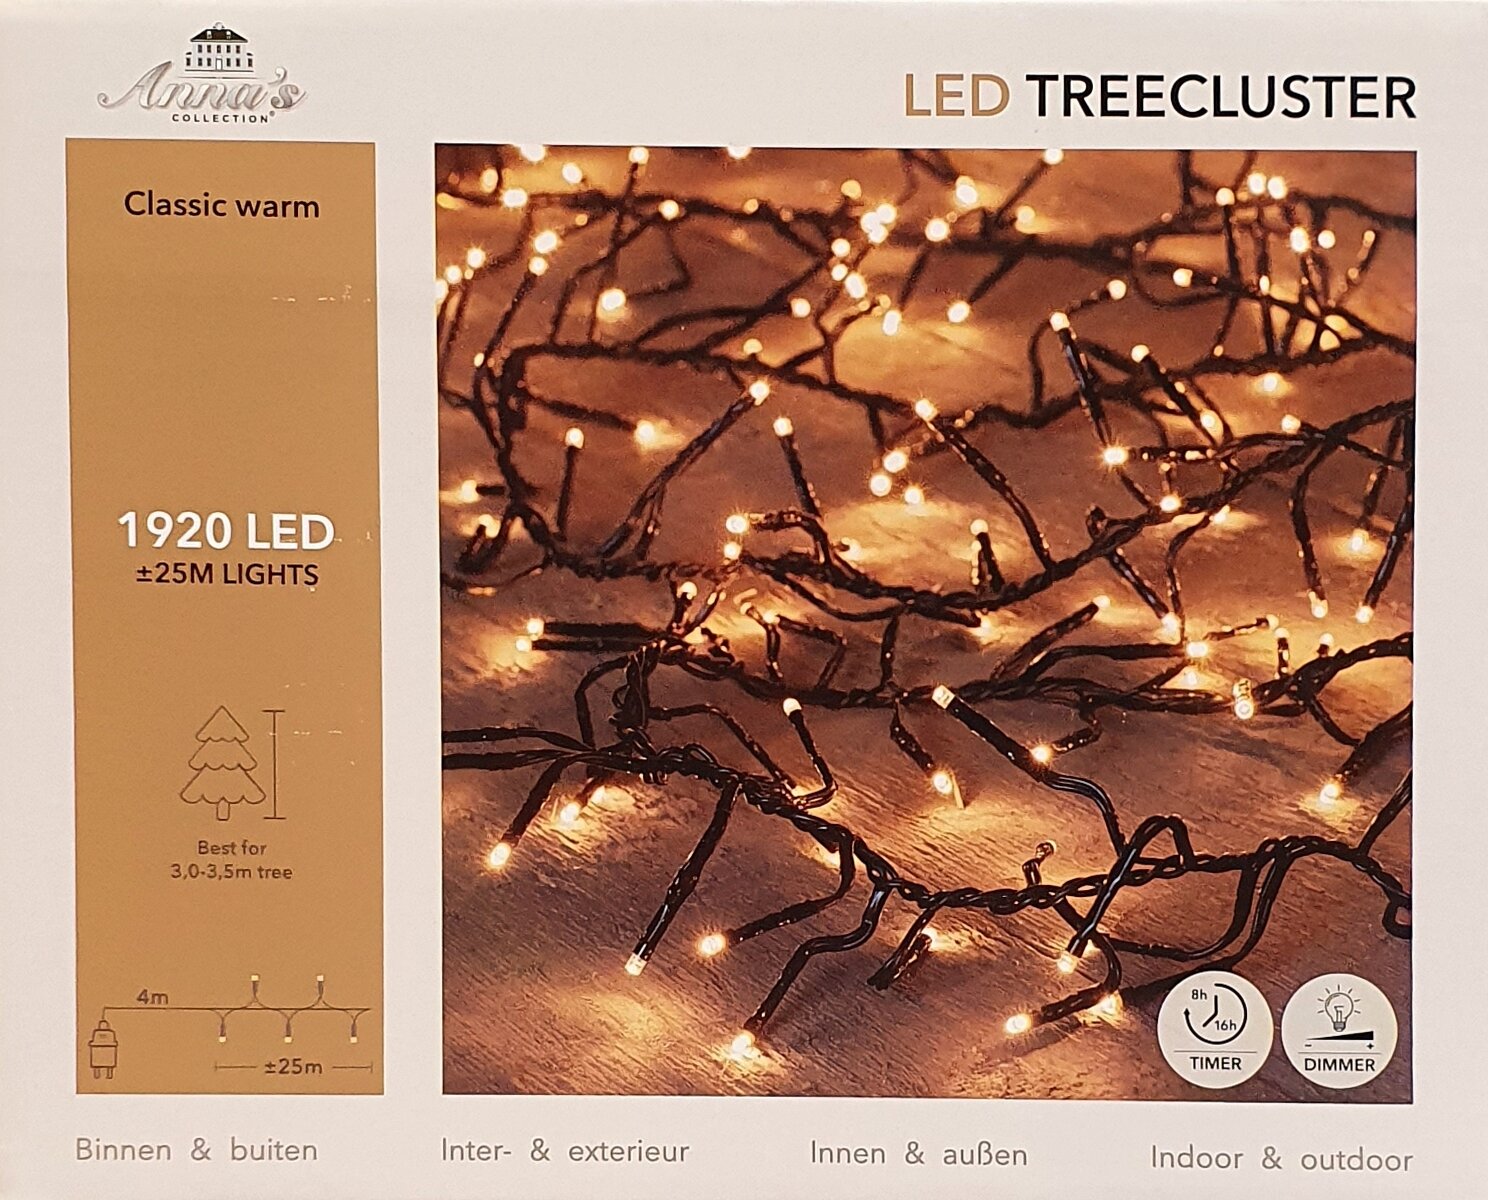 Treeclusterverlichting 1920-lamps LED 'classic warm'